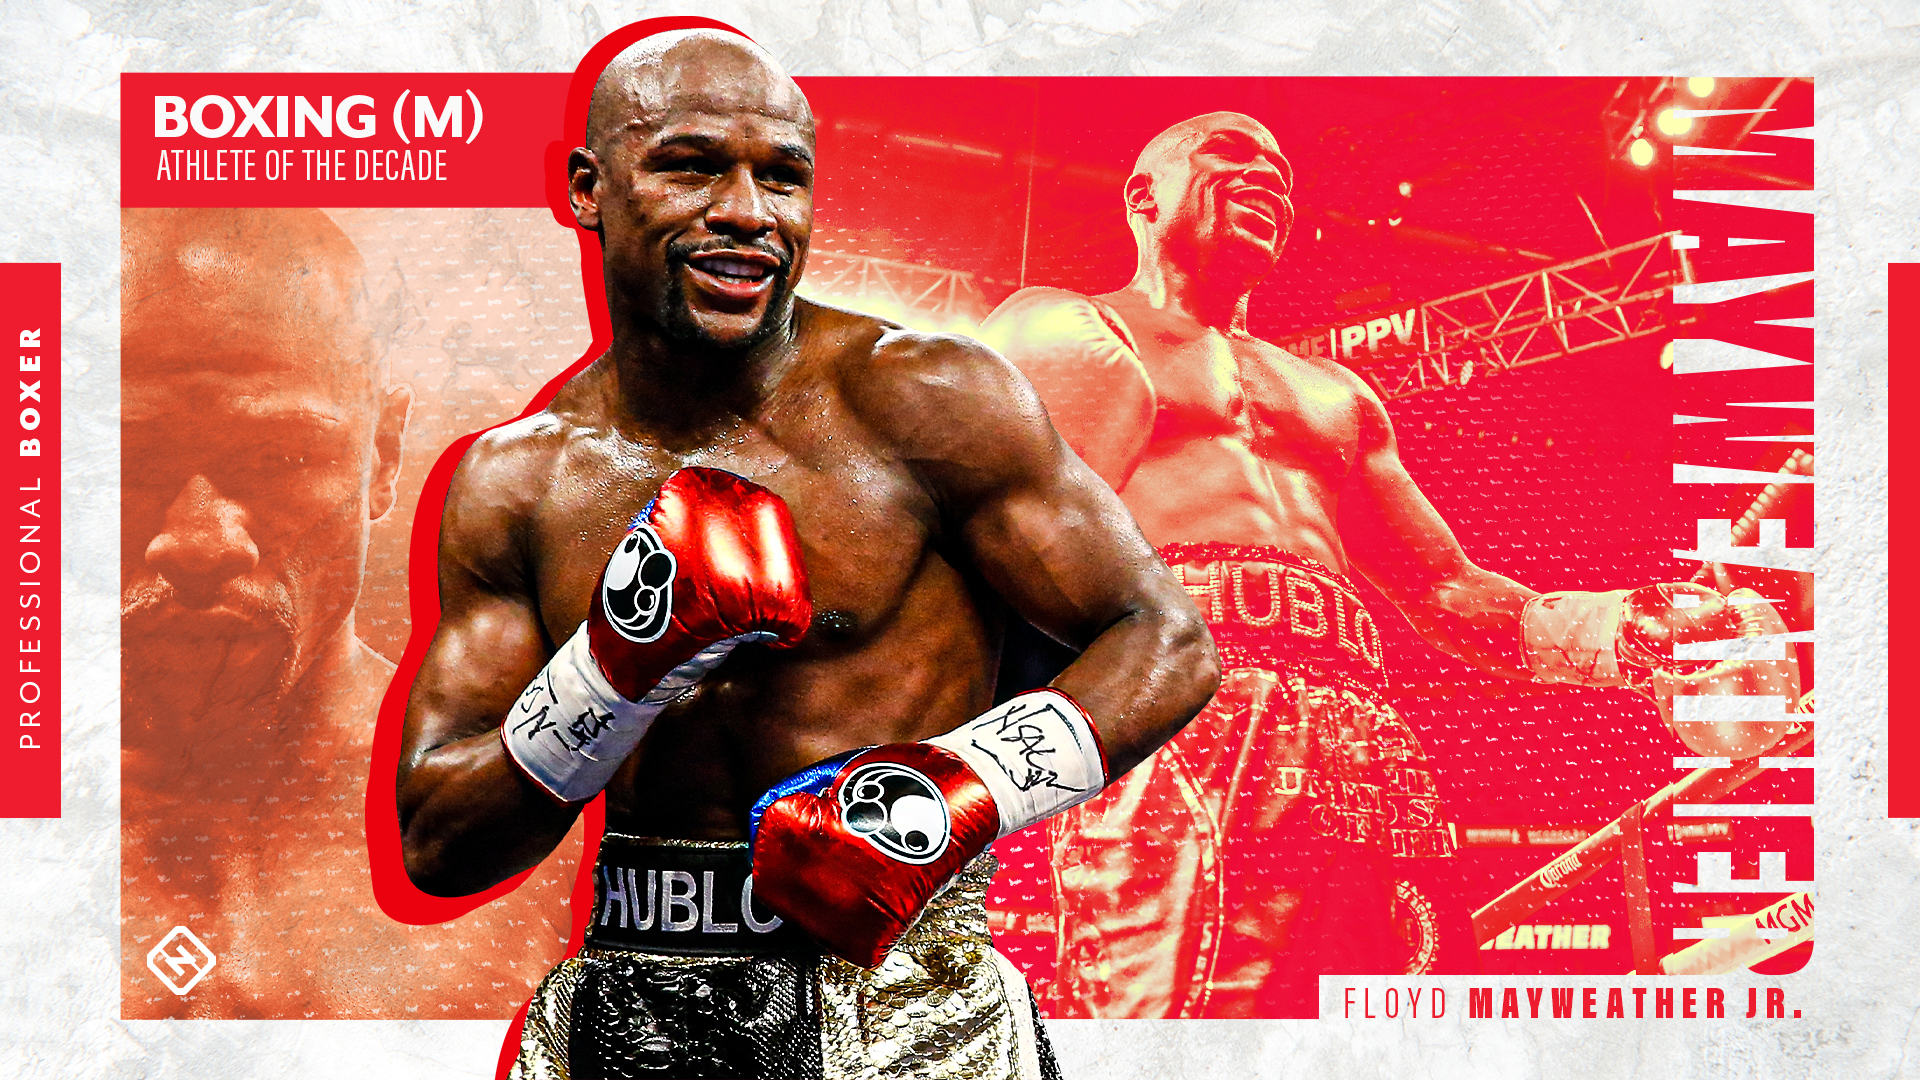 Floyd Mayweather Jr.: Sporting News men's boxing Athlete of the Decade